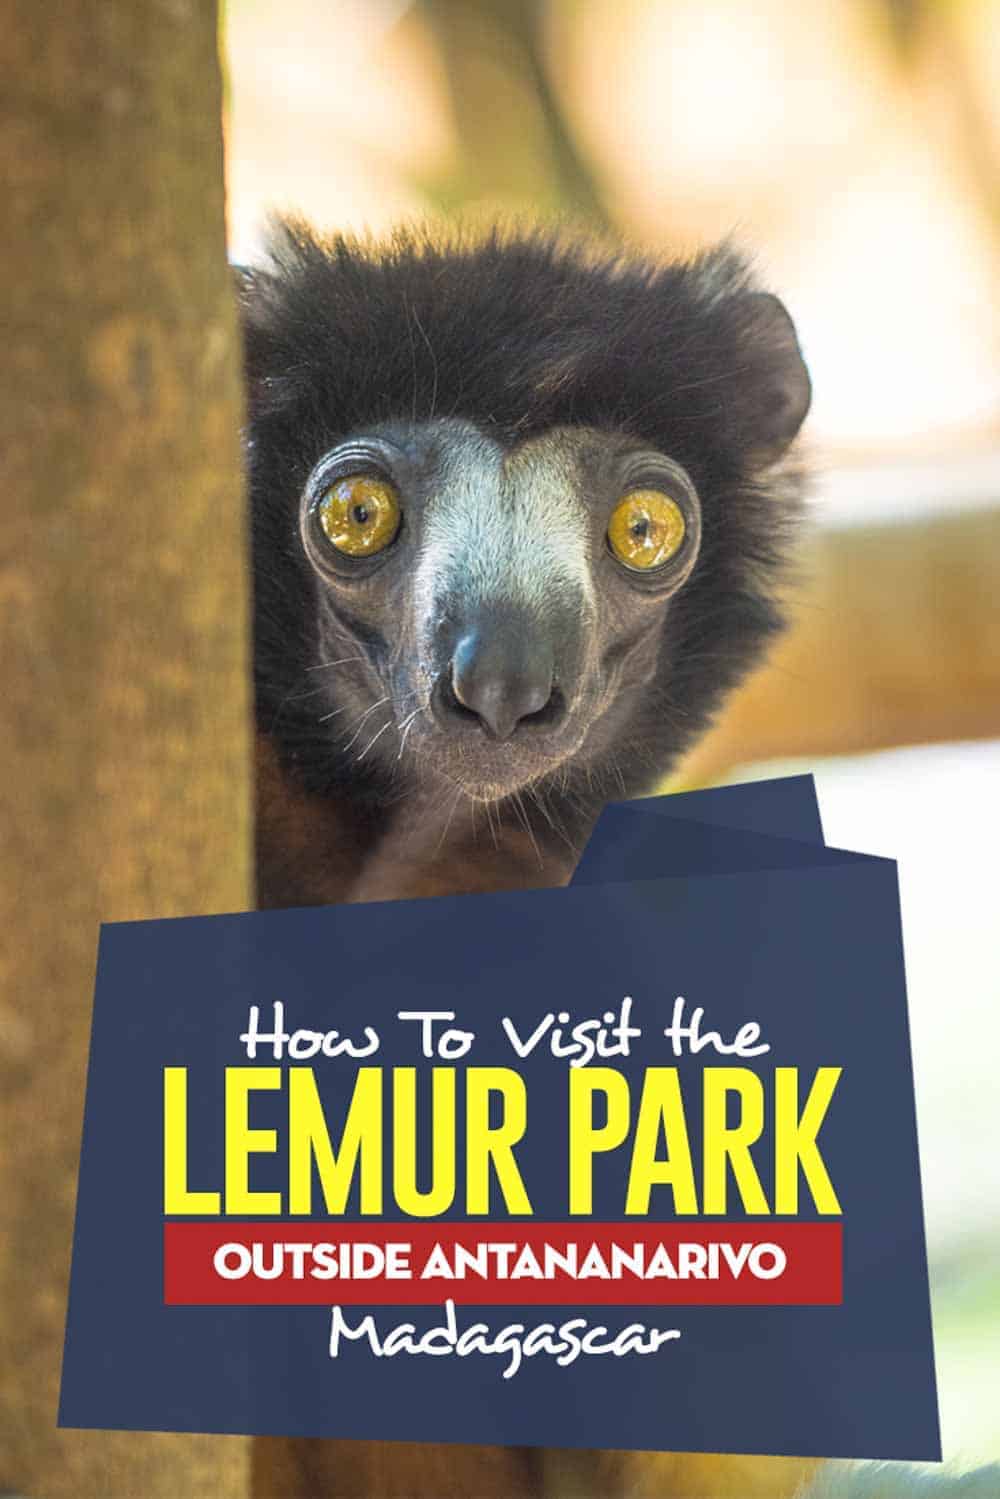 Travel Guide to See Lemur in the Lemurs outside the capital of Madagascar. #madagascar #africa #wildlife #animals #lemur